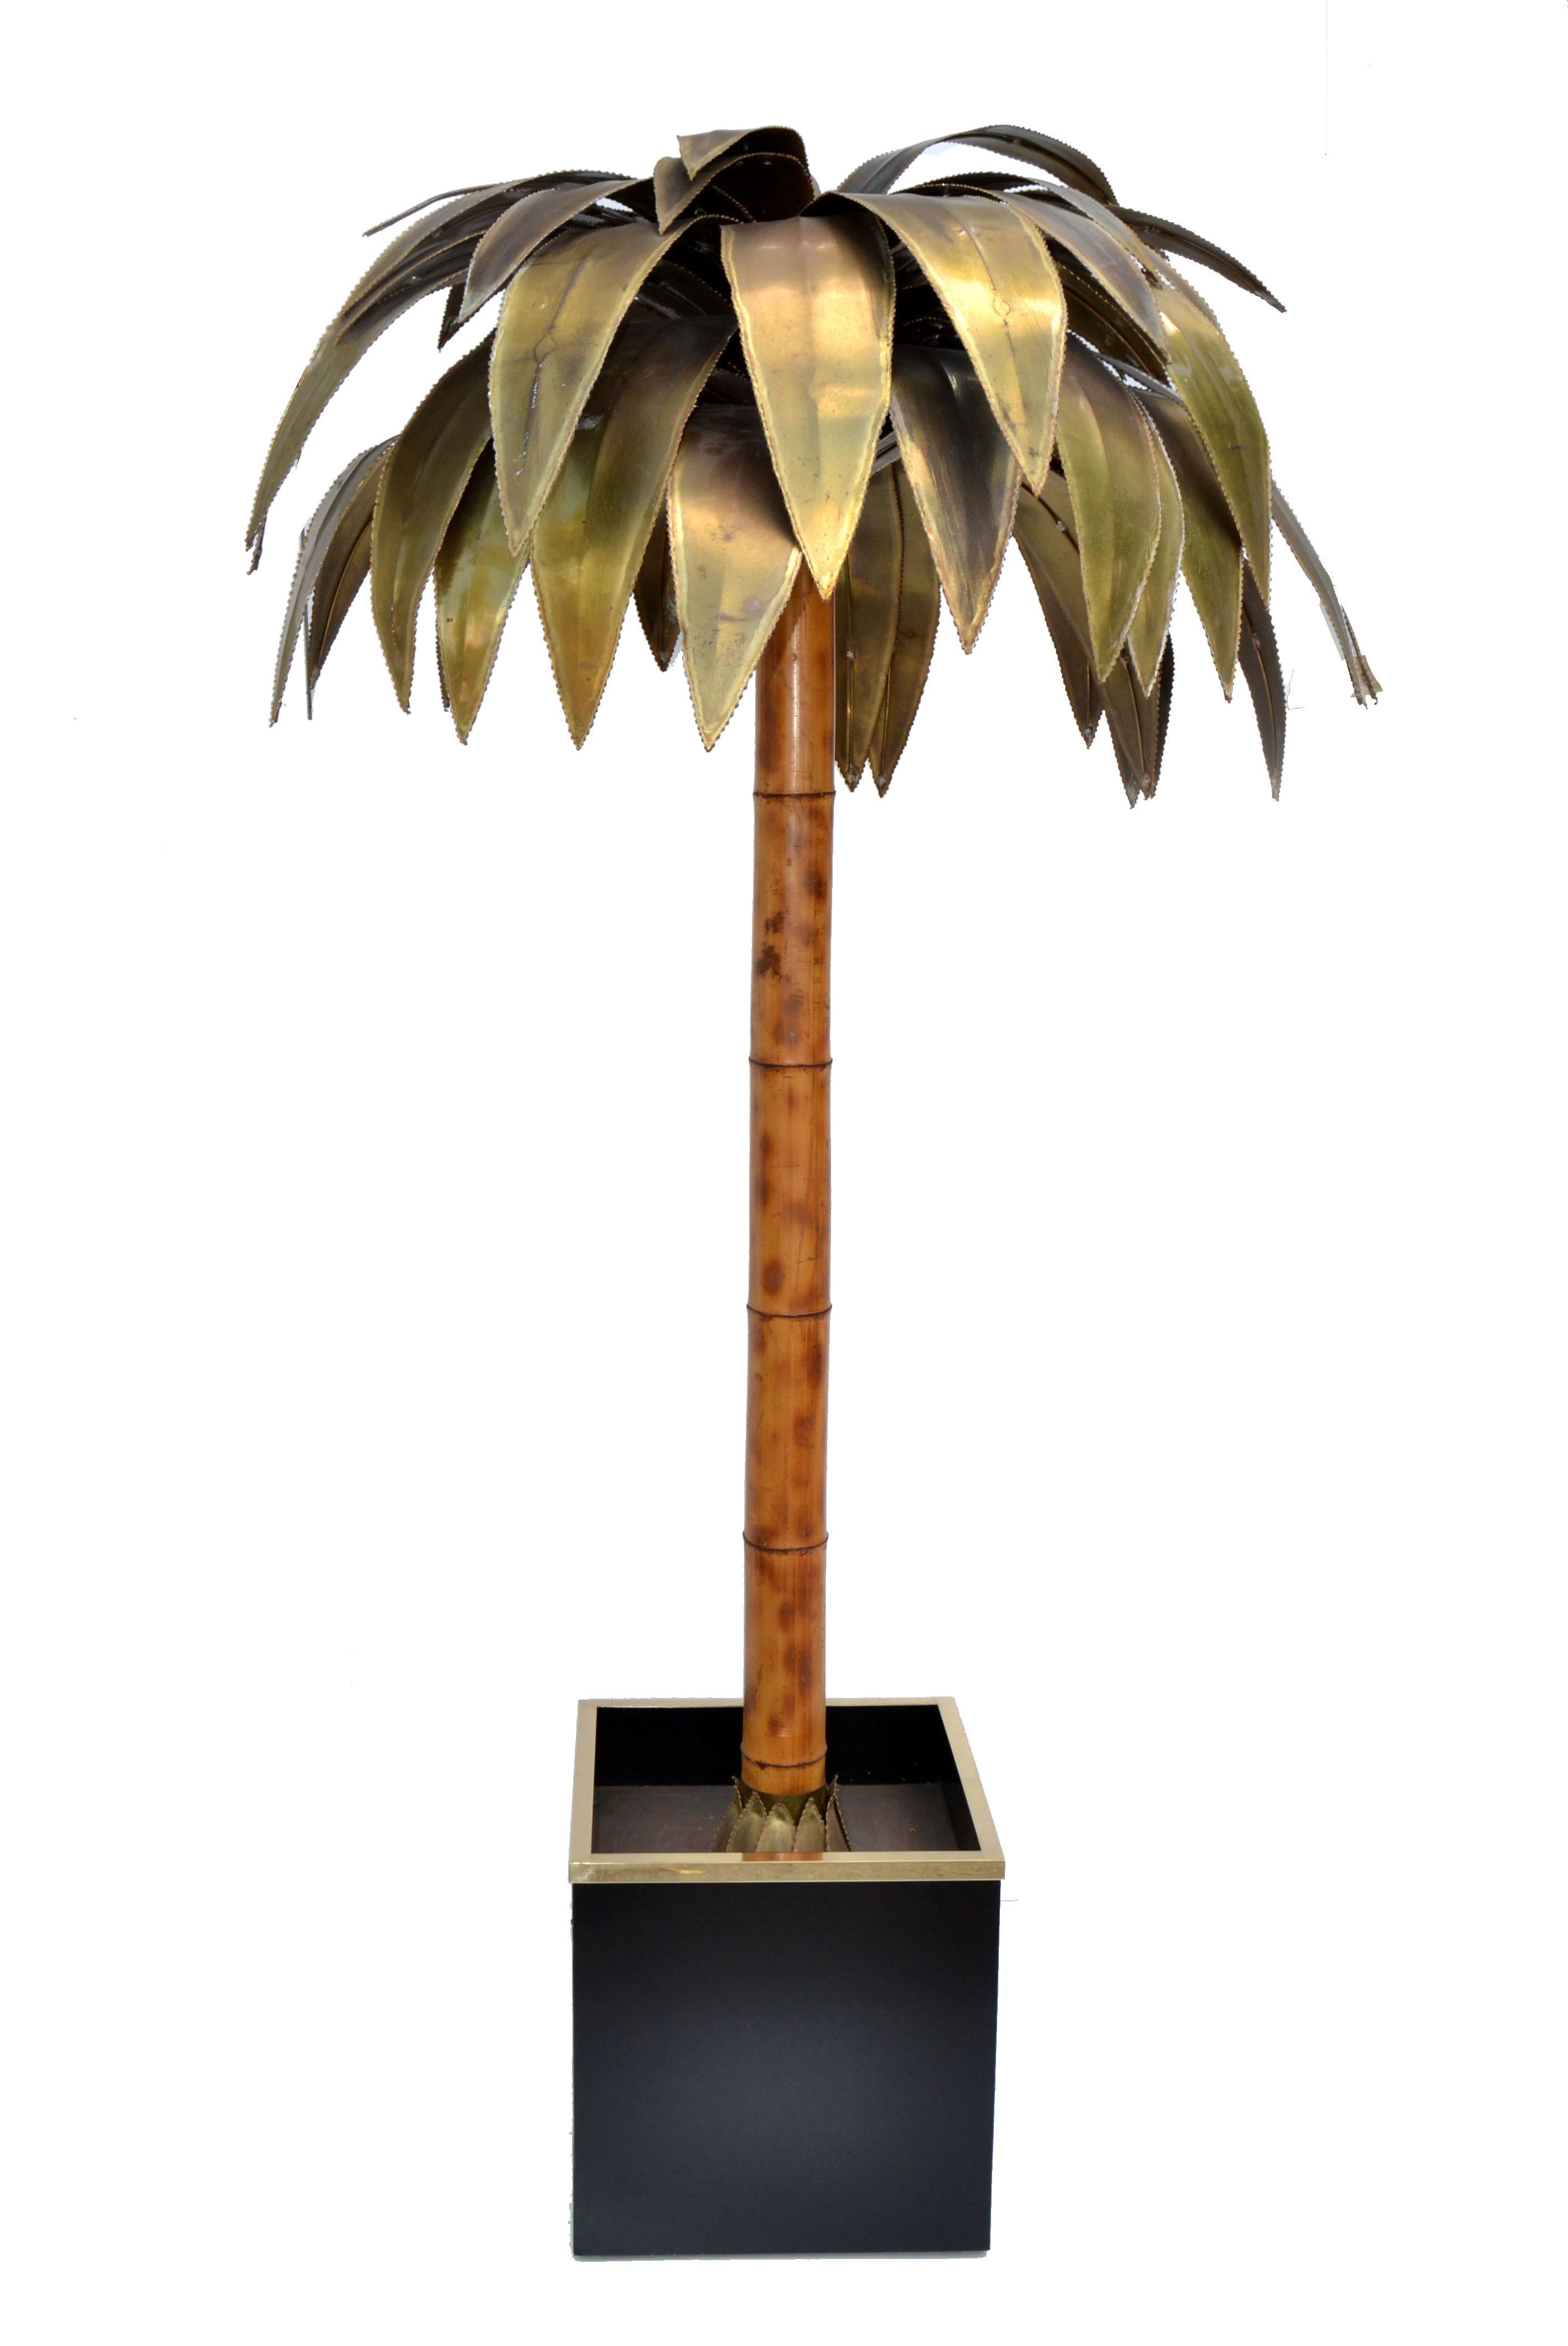 One of a Kind Maison Jansen designed 7ft H bronze, brass and bamboo palm tree floor lamp made in 1965.
Provenance: Palace Hotel in La Baule, France.
Wired for US and in working condition, takes five-light bulbs, One Regular 100watt bulb on Top and